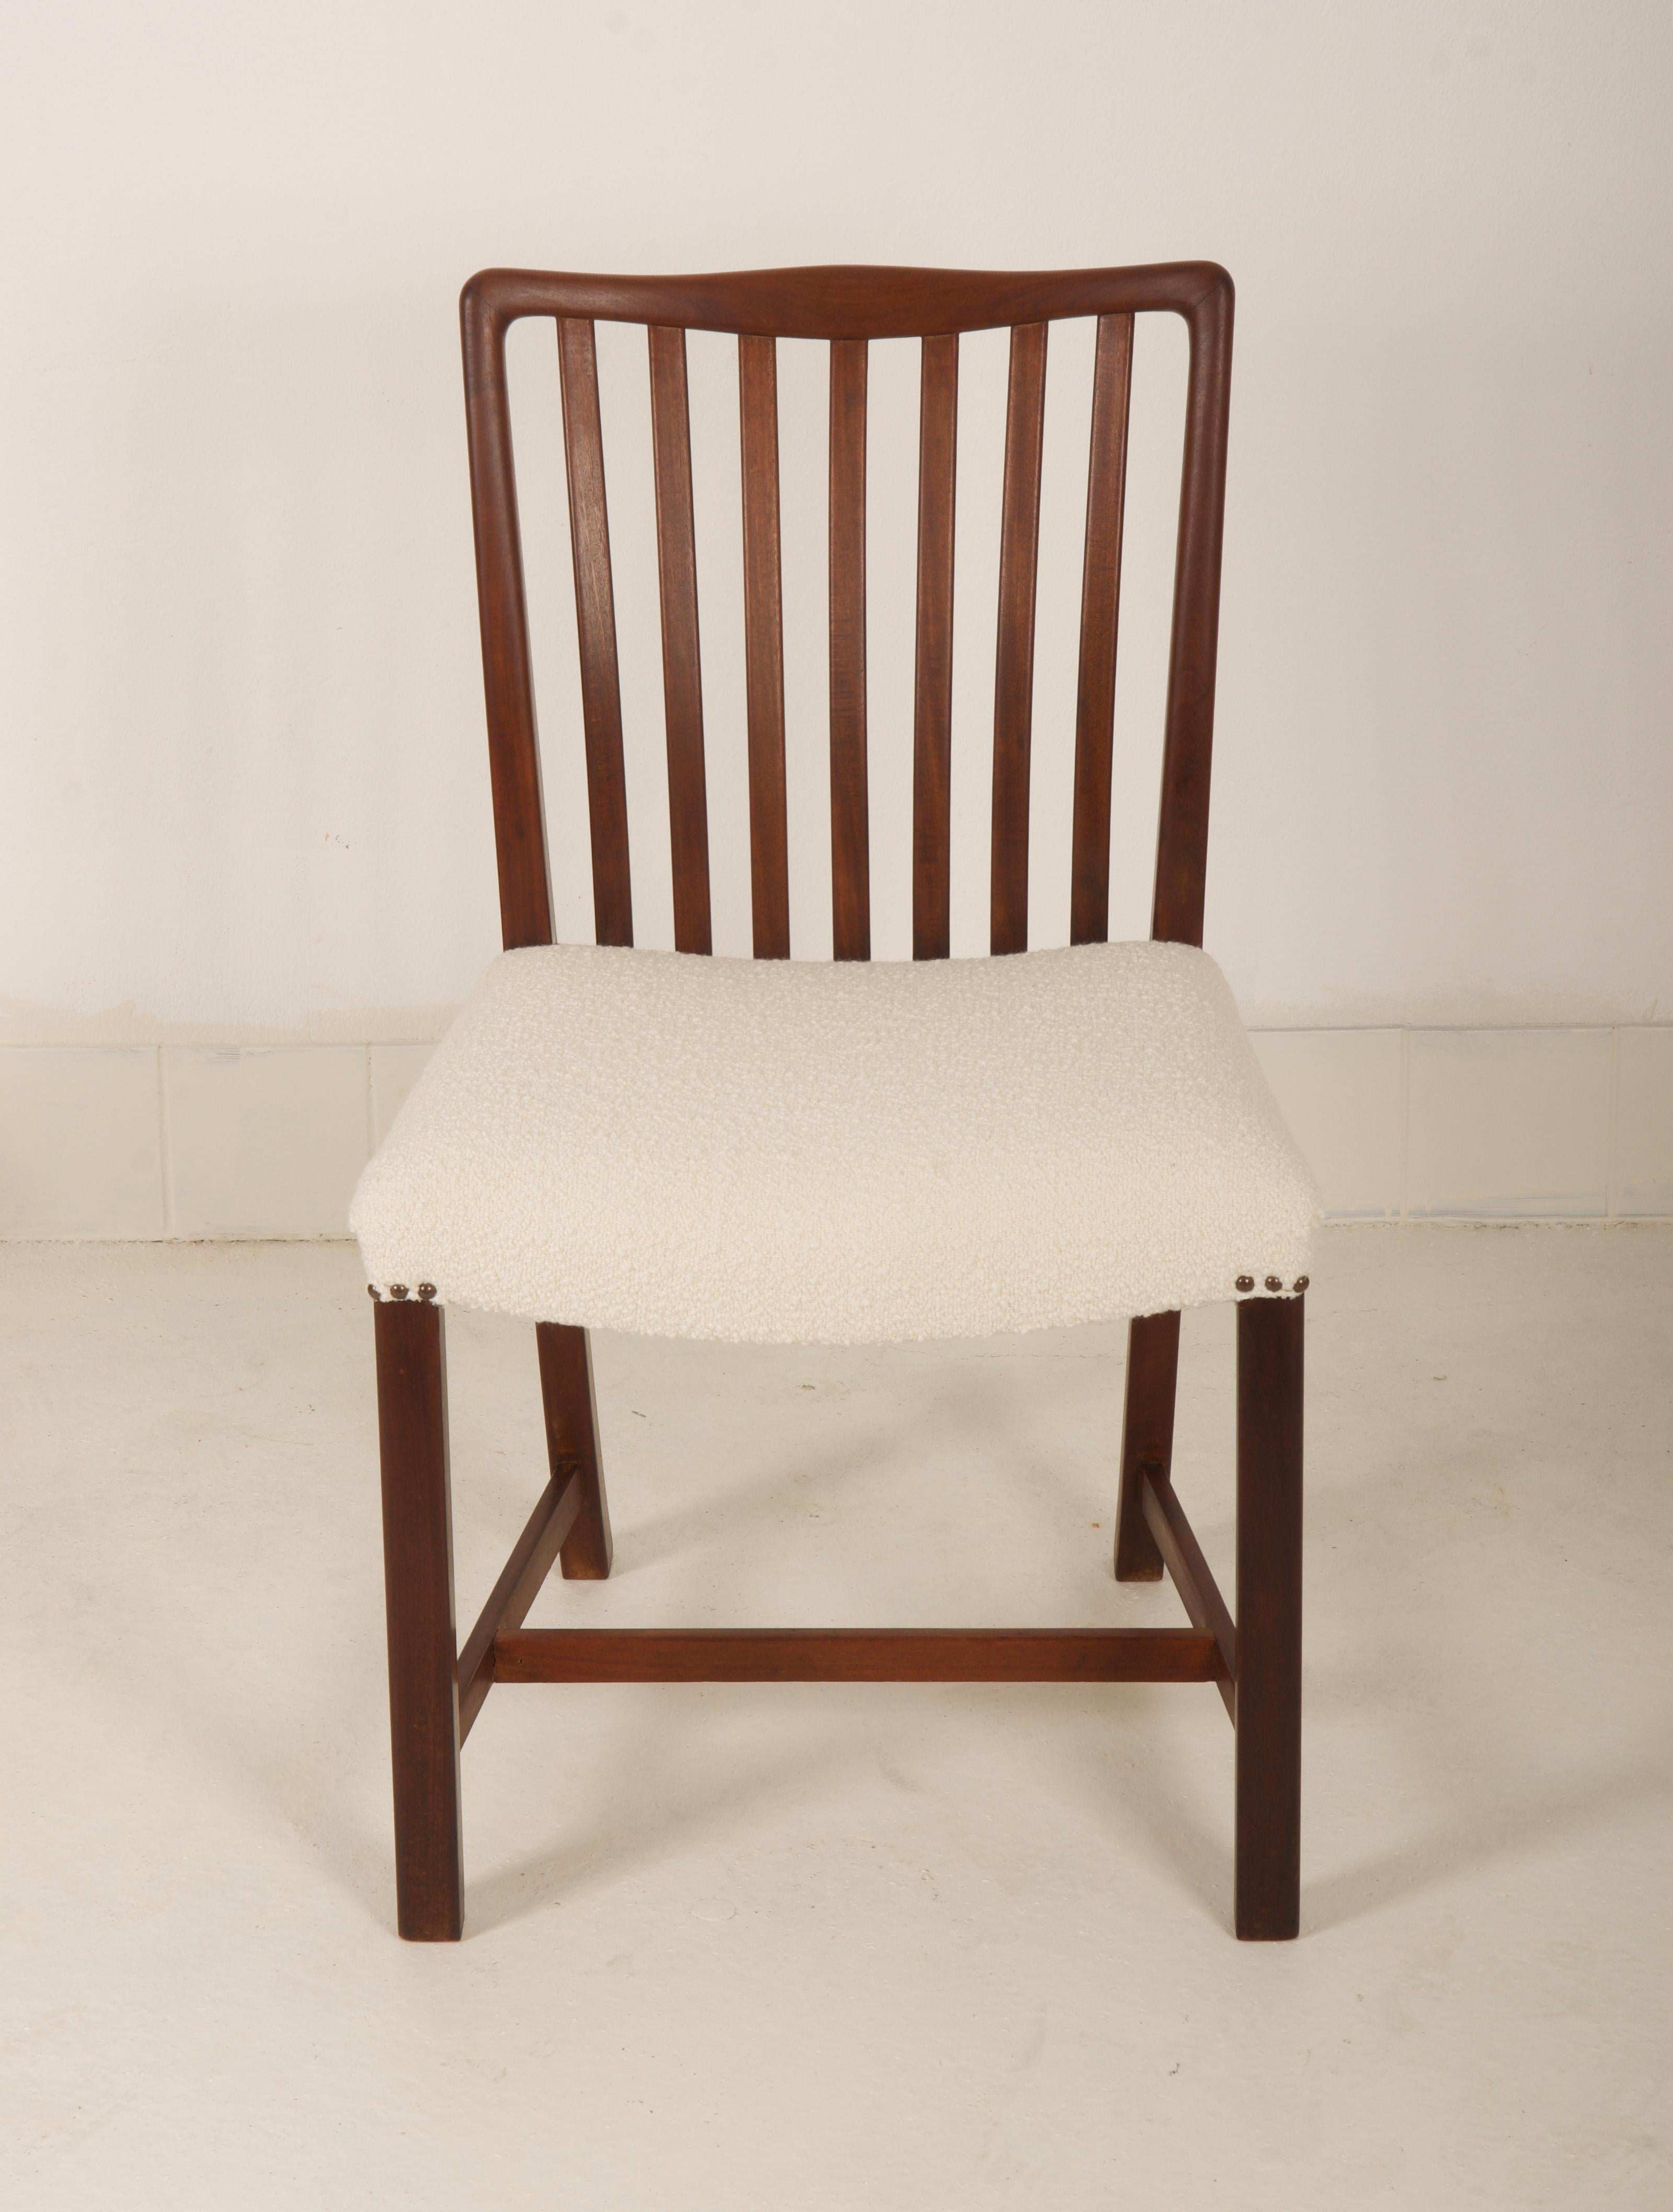 Six chairs made by Sondergaard Mobler in Denmark in the late 1940s.
The frame is made of mahogany, only one restored the rest delivery time 3-4 weeks. 
Upholstery with another fabric on request possible.

Measures: H. 47/87, B. 50 cm.